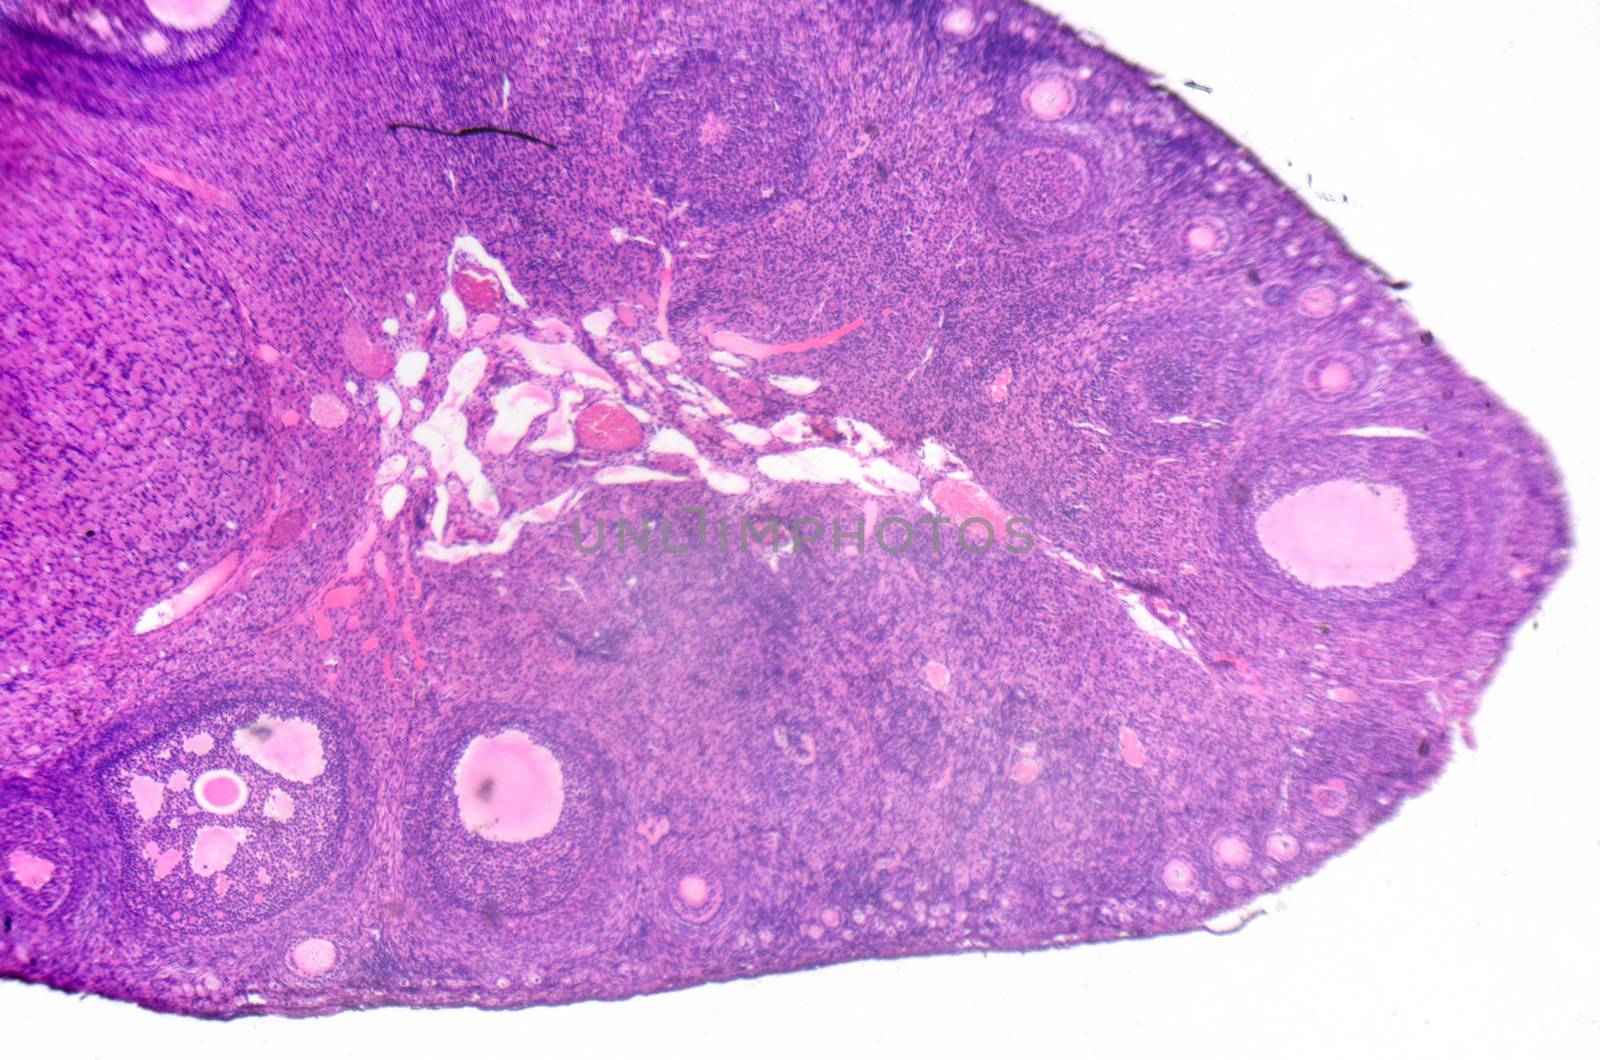 micrograph of ovary showing primordial, primary and secondary fo by HERRAEZ